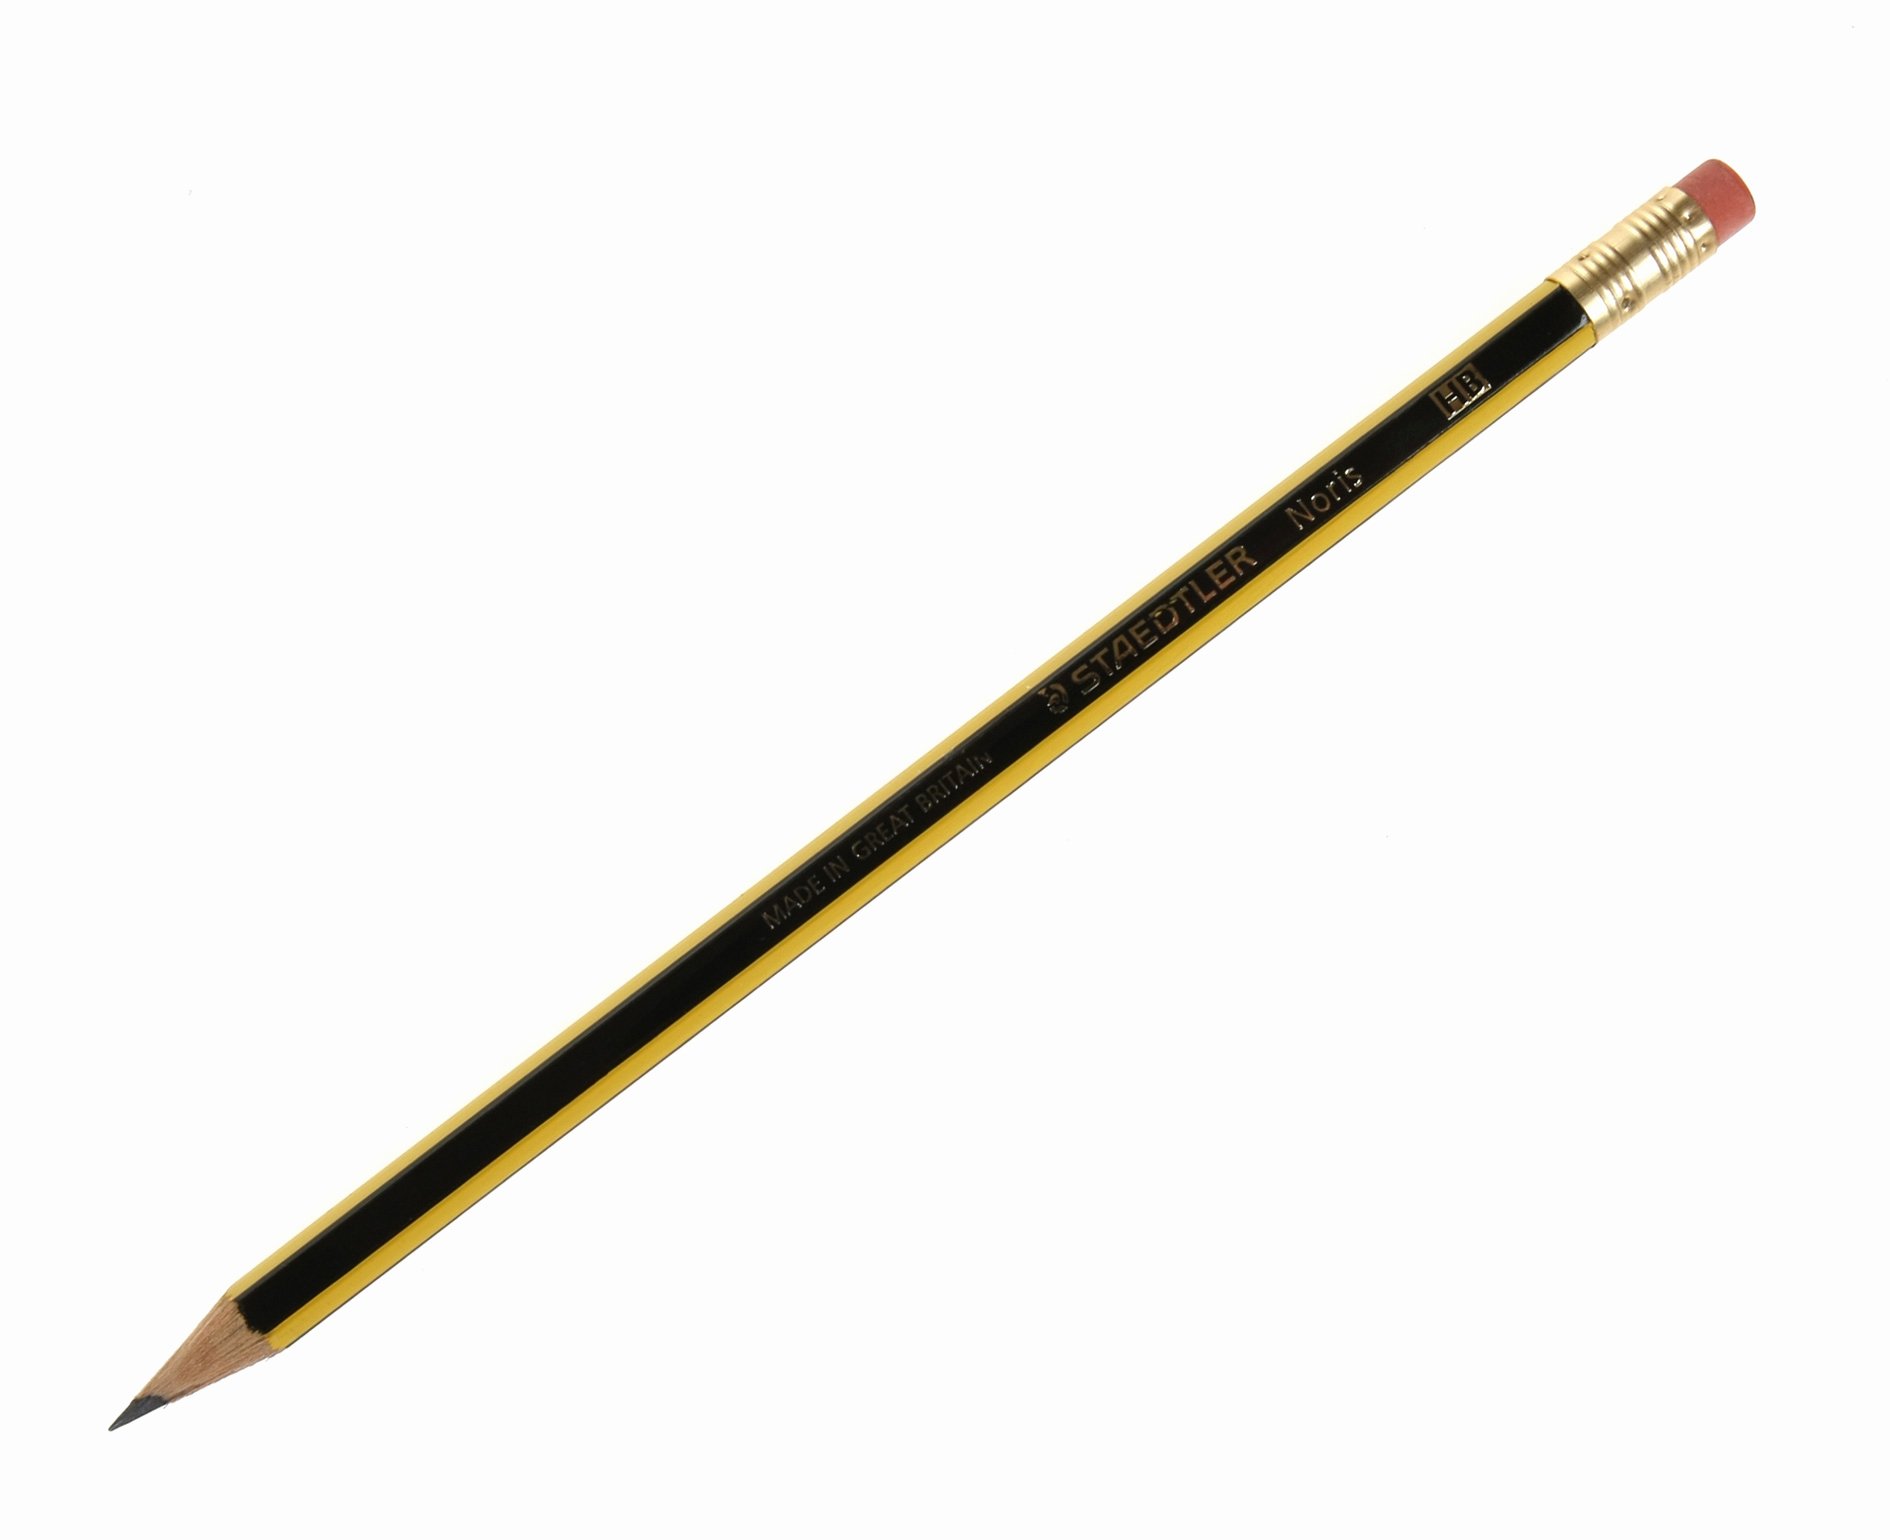 A Picture Of A Pencil Unique the Meaning and Symbolism Of the Word Pencil